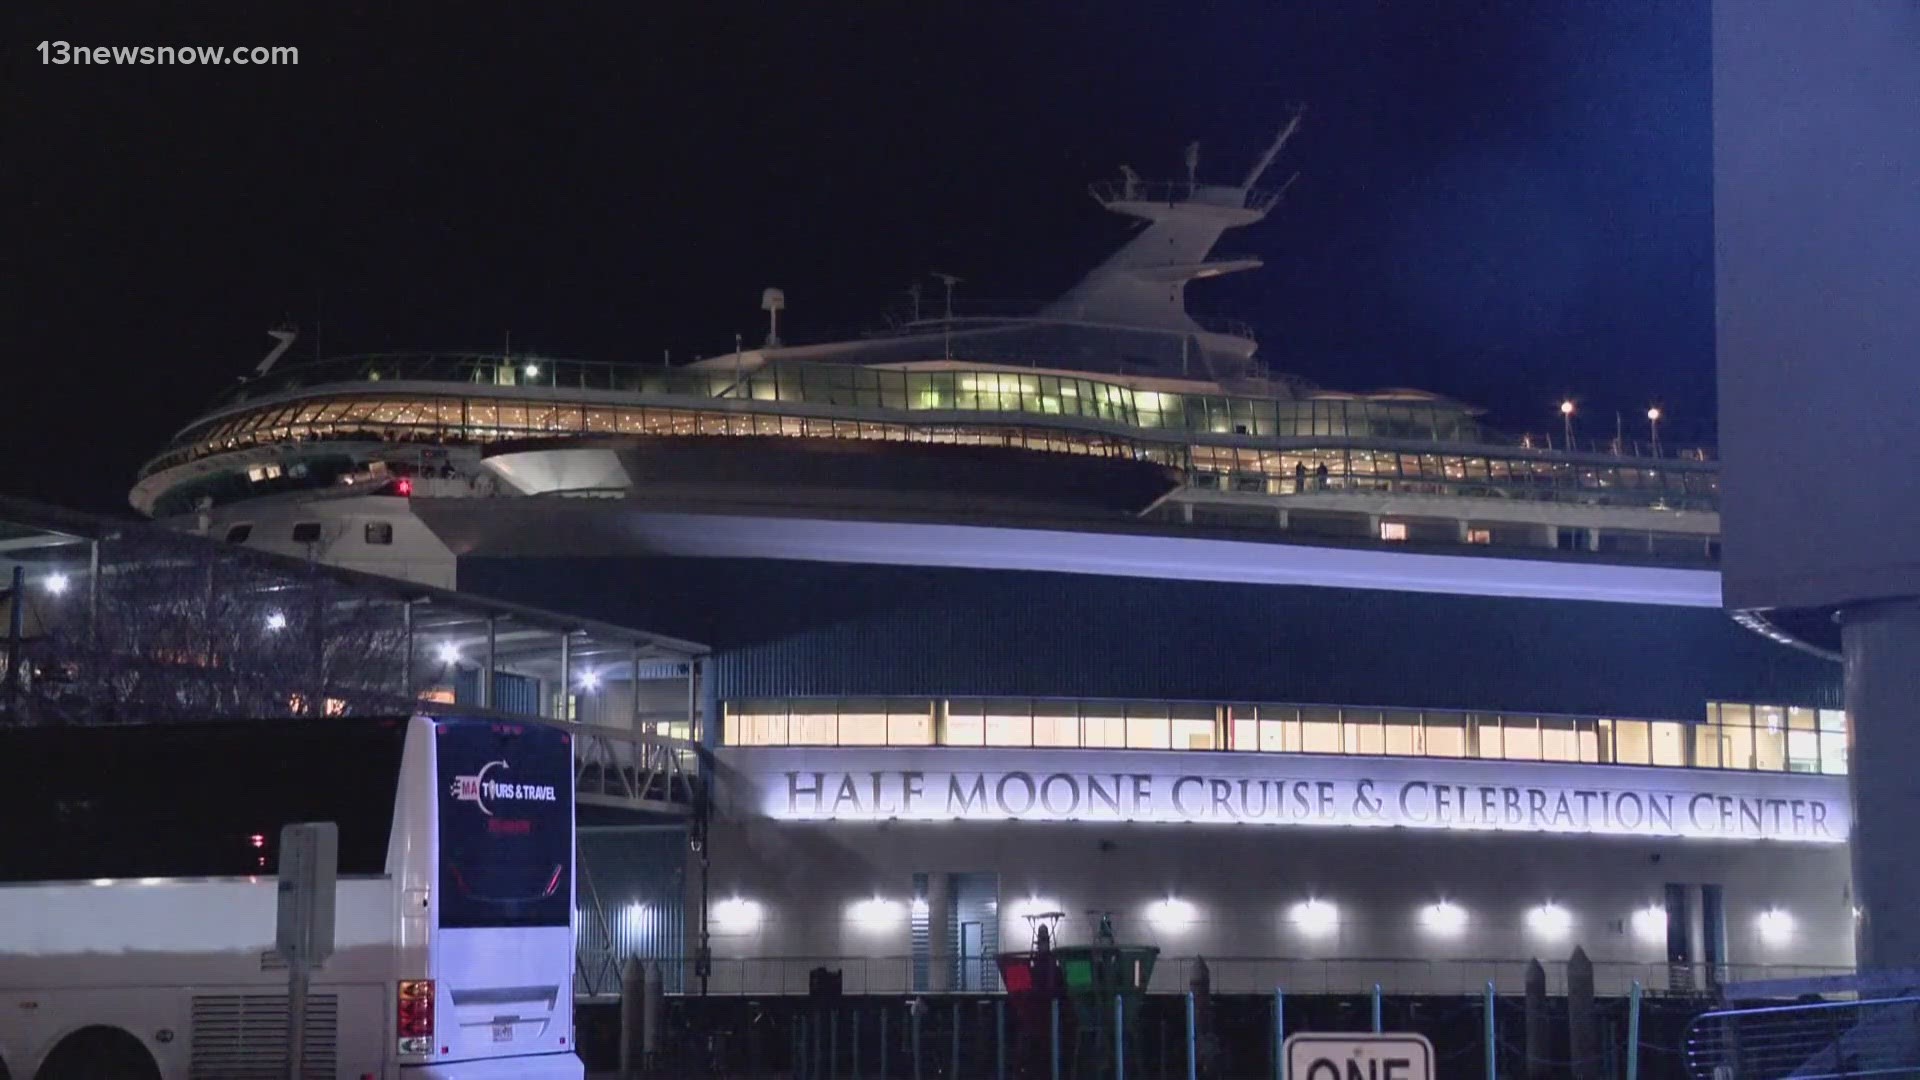 This is the second cruise line to re-route to Norfolk following the Key Bridge collapse in Baltimore. 2,200 people got off the ship on Thursday morning.